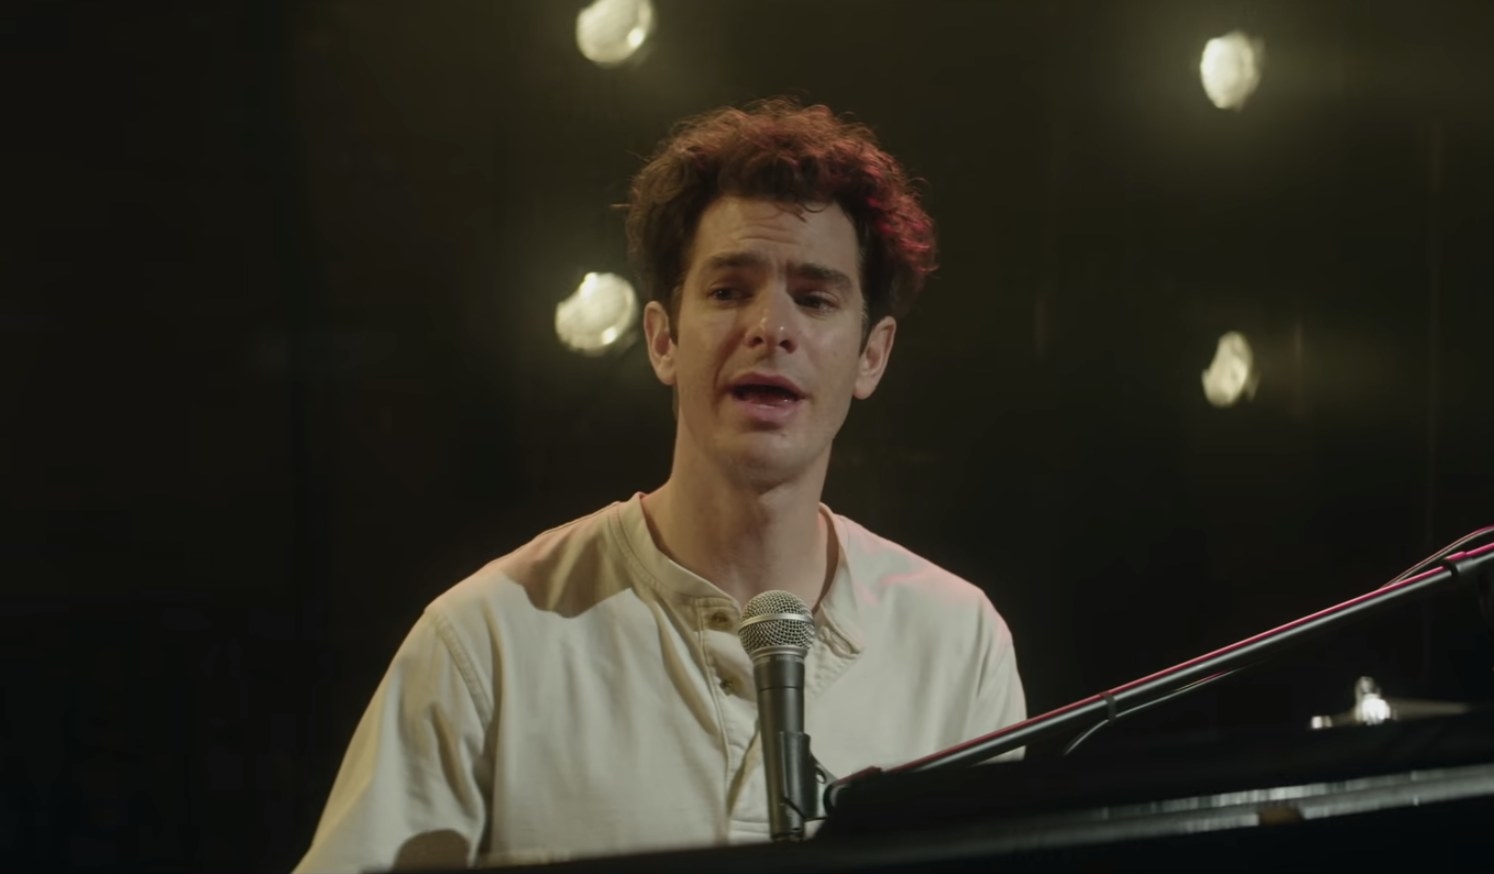 Andrew Garfield singing and playing the piano